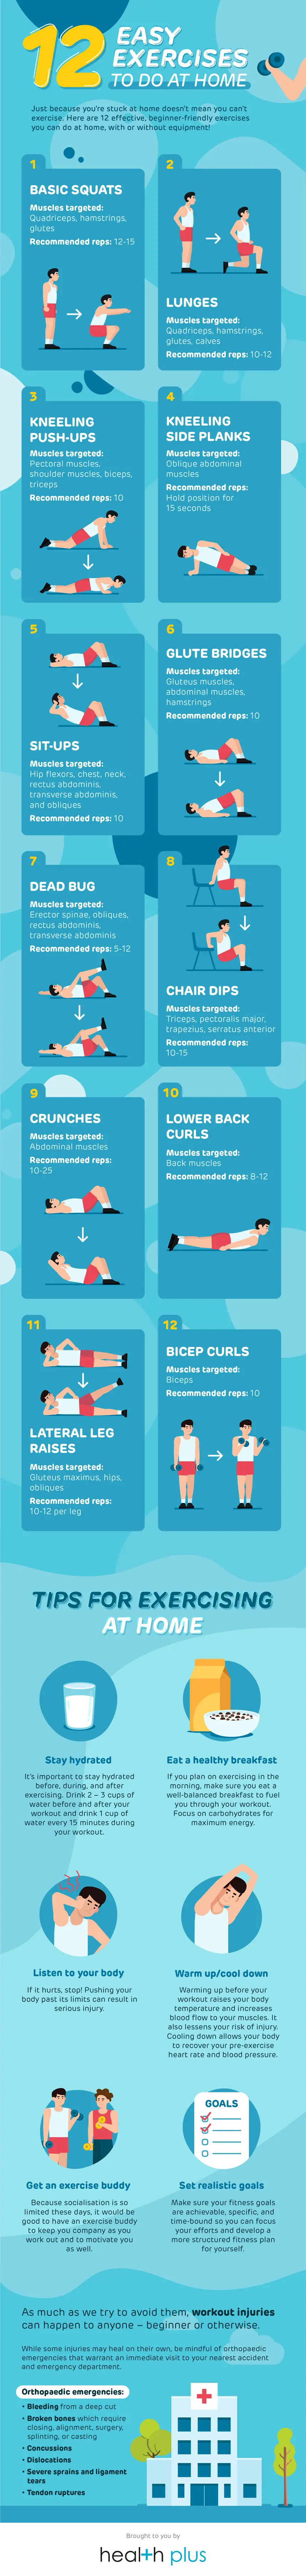 Easy home exercises